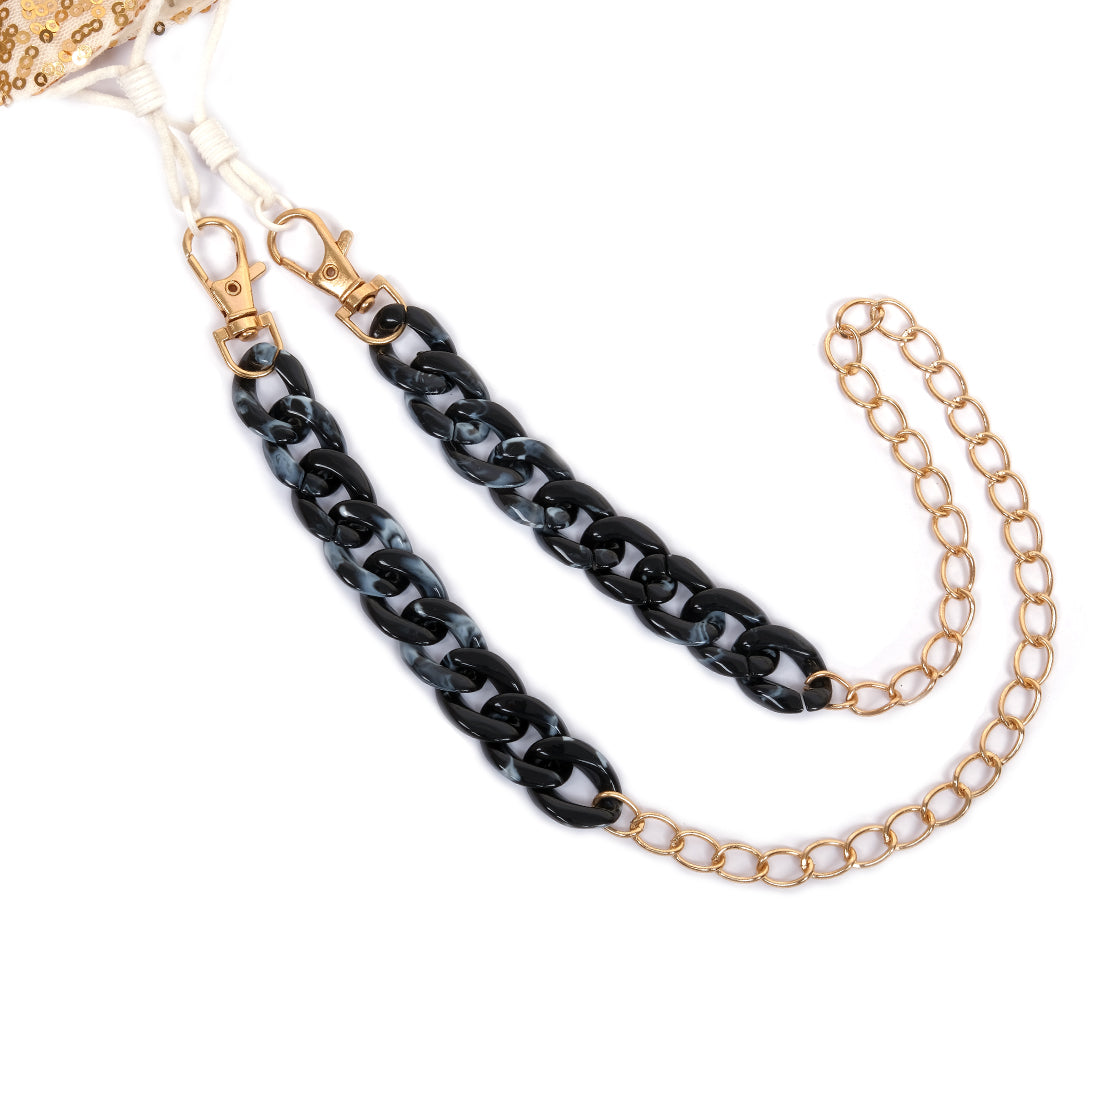 METALLIC GOLD-TONED CHAIN-LINK MARBLE BLACK ACRYLIC MASK CHAIN OR SUNGLASS CHAIN